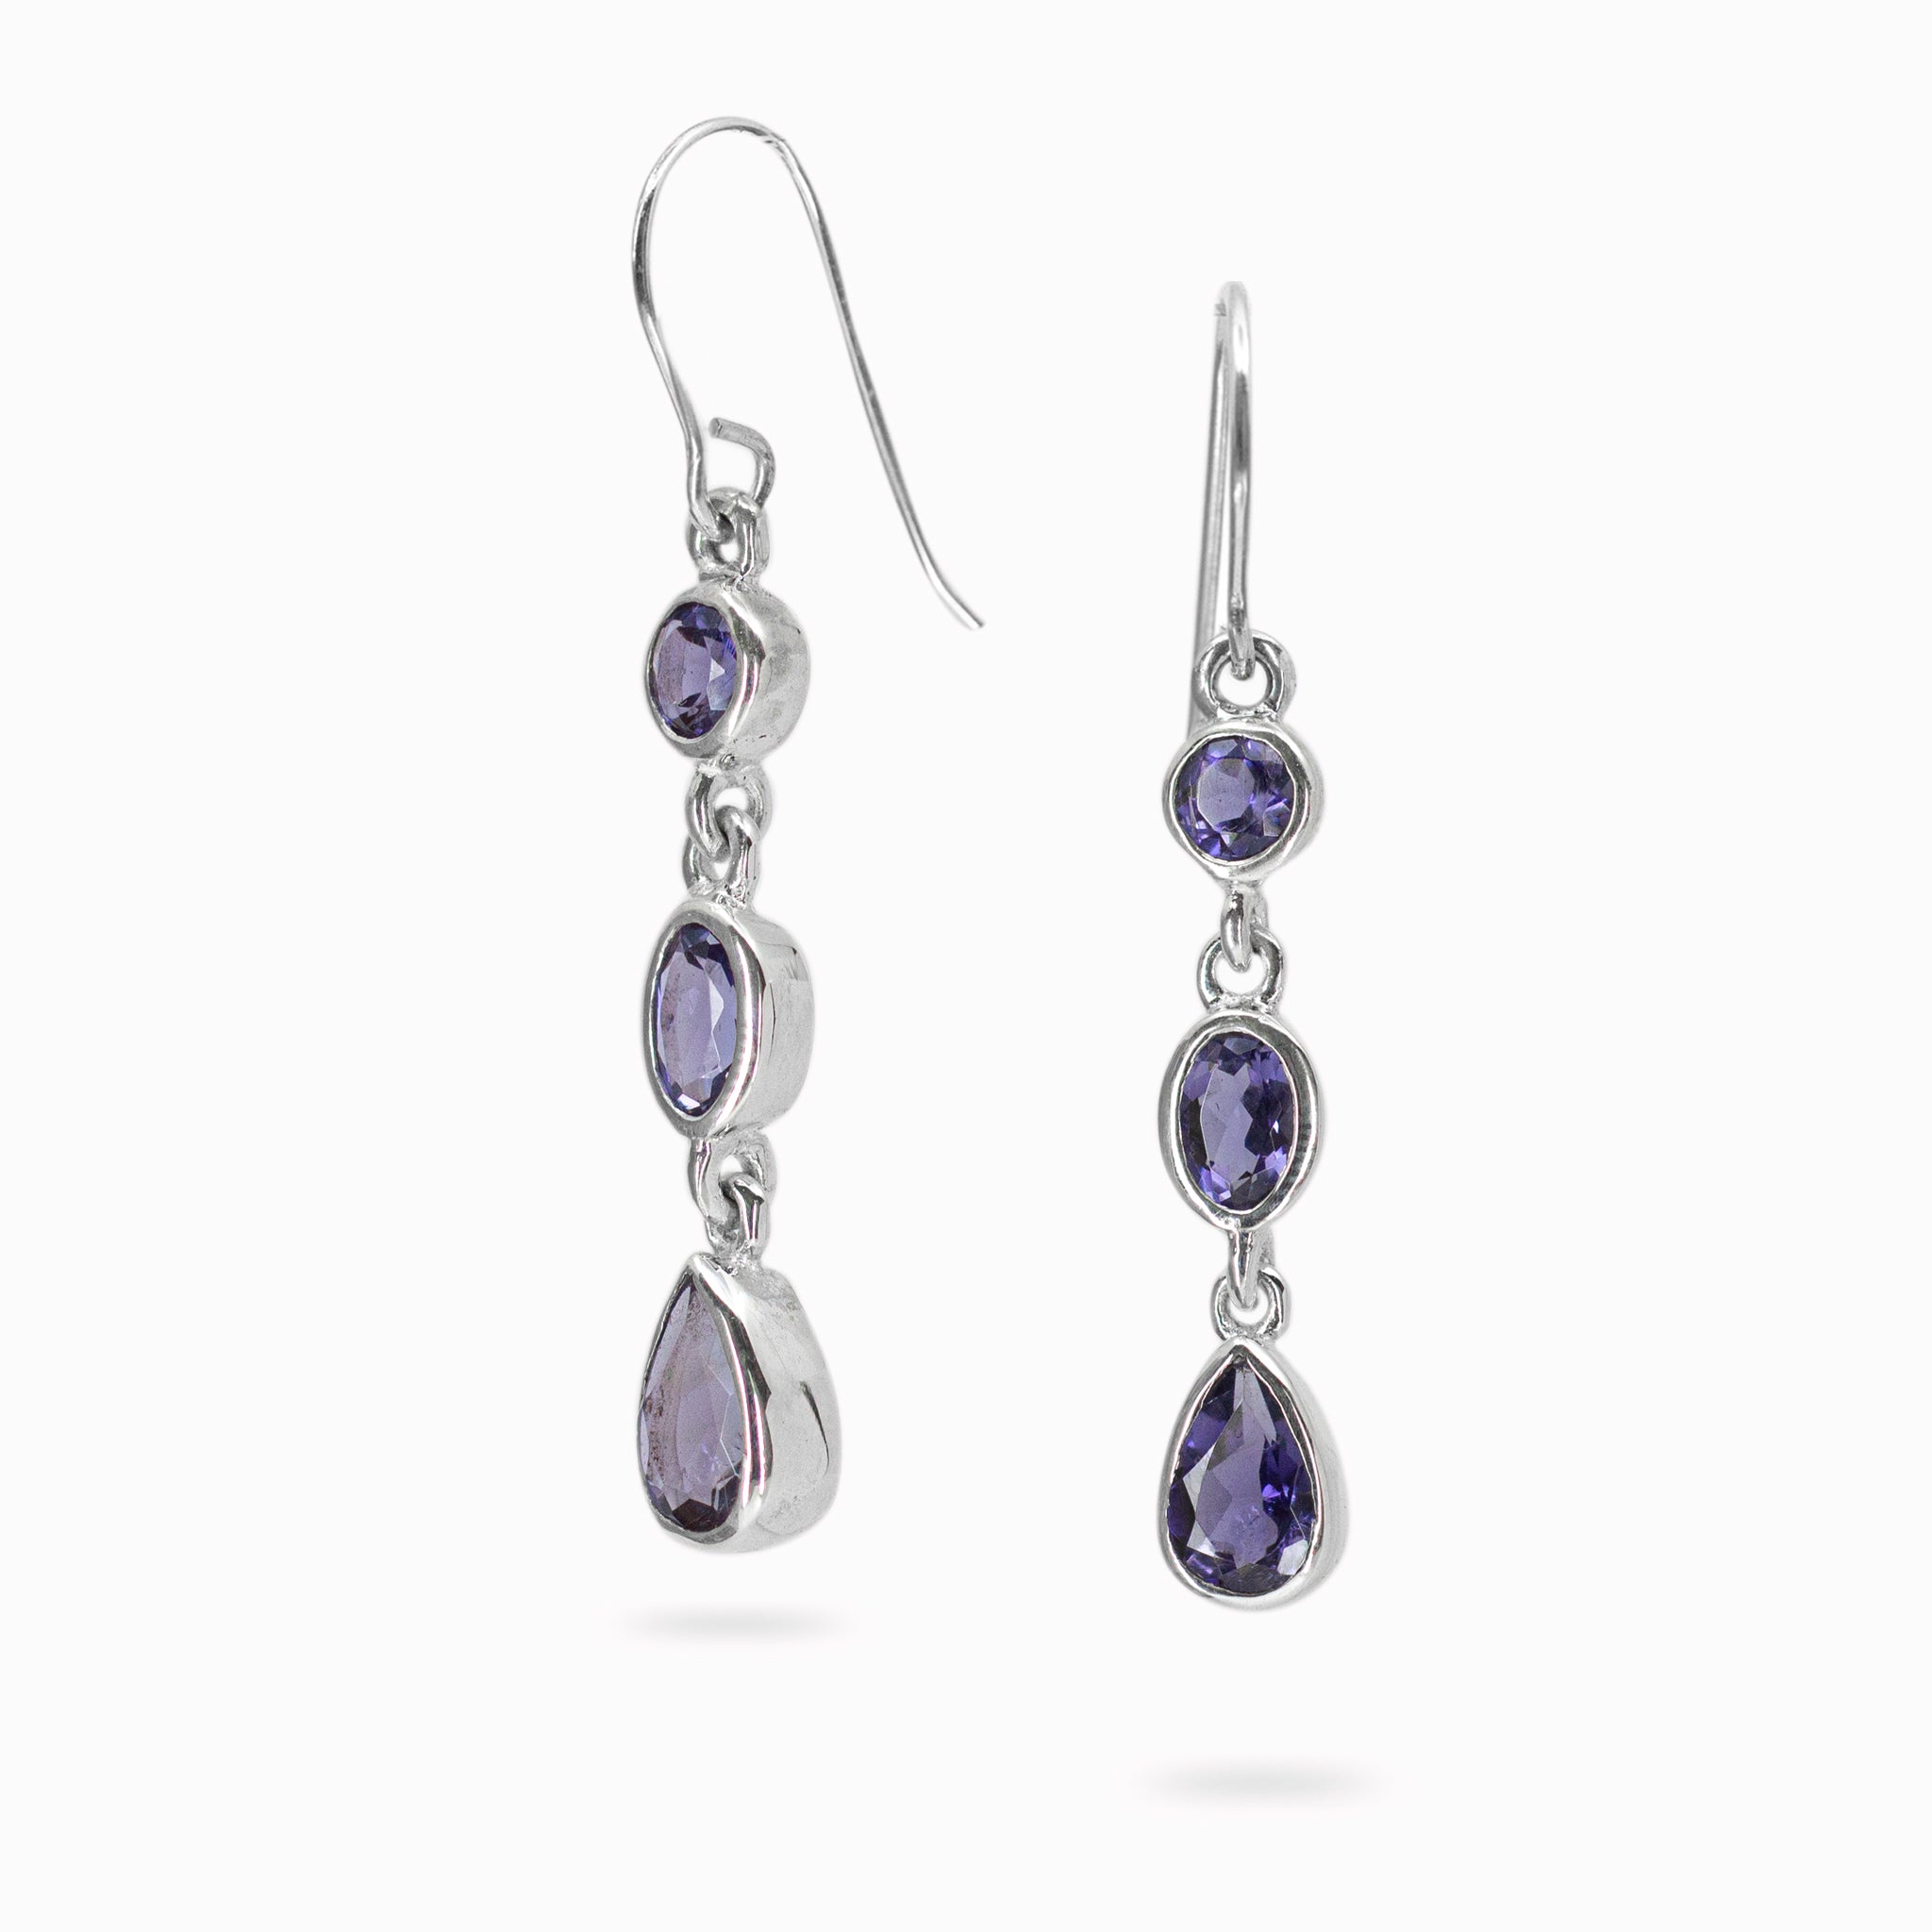 Iolite Jewellery Collection - Shop Iolite Necklaces, Earrings, and Rings